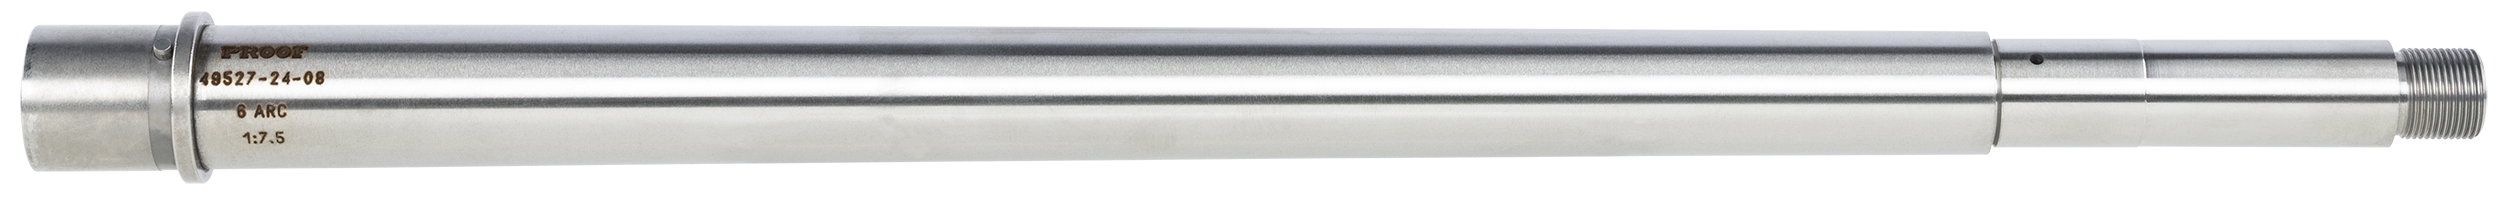 Proof Research 6mm ARC 16 Stainless Steel Finish Rifle Length Gas